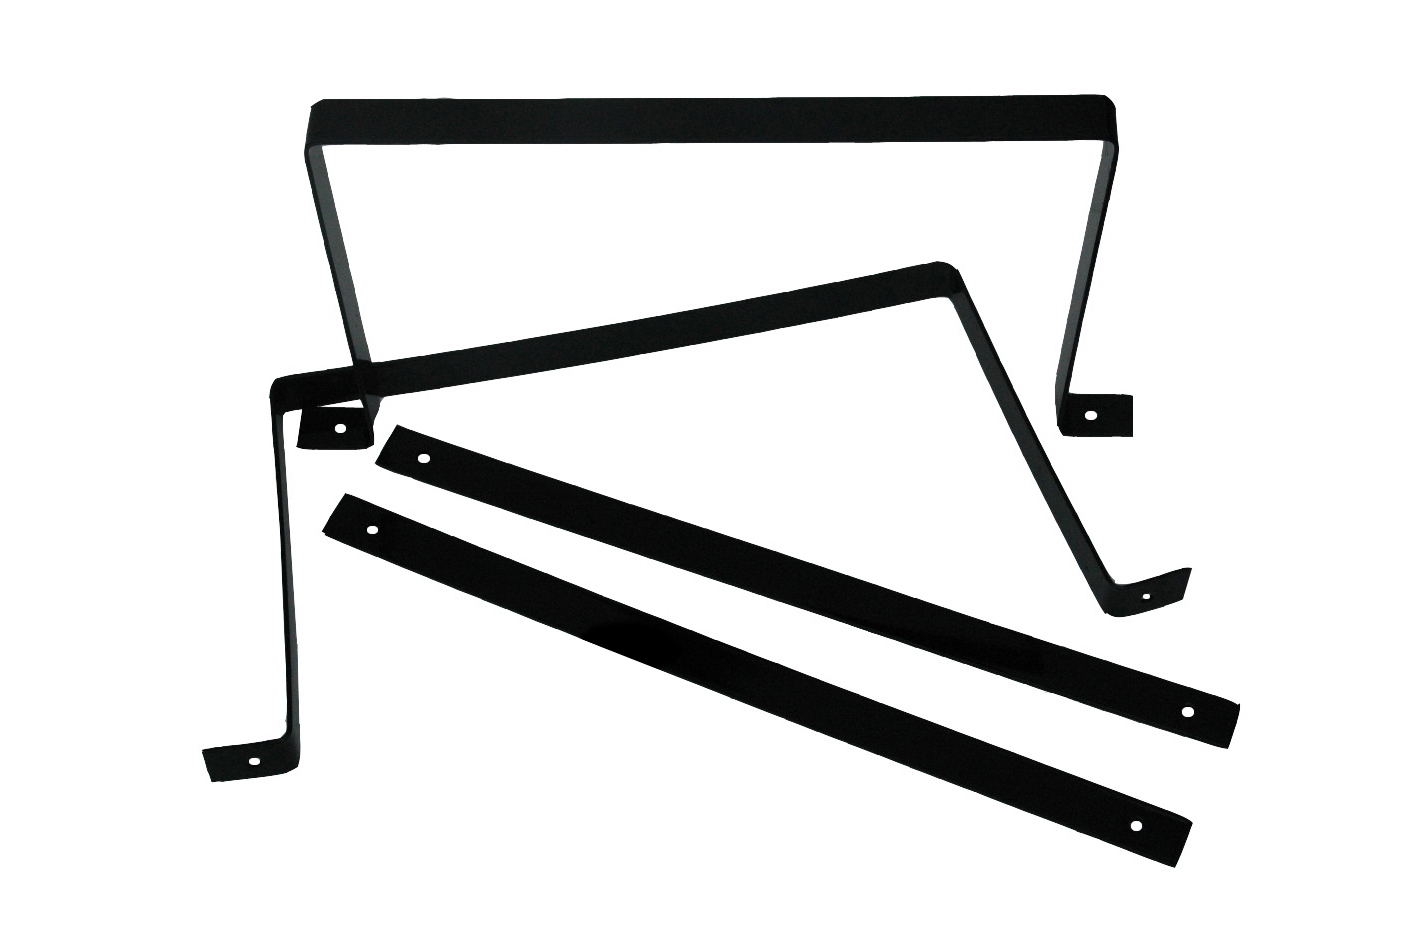 RCI 7520A Fuel Cell Mounting Strap, 12 in Wide x 10 in Tall, Steel, Black Primer, RCI 2160 Series 15 Gallon Fuel Cells, Kit